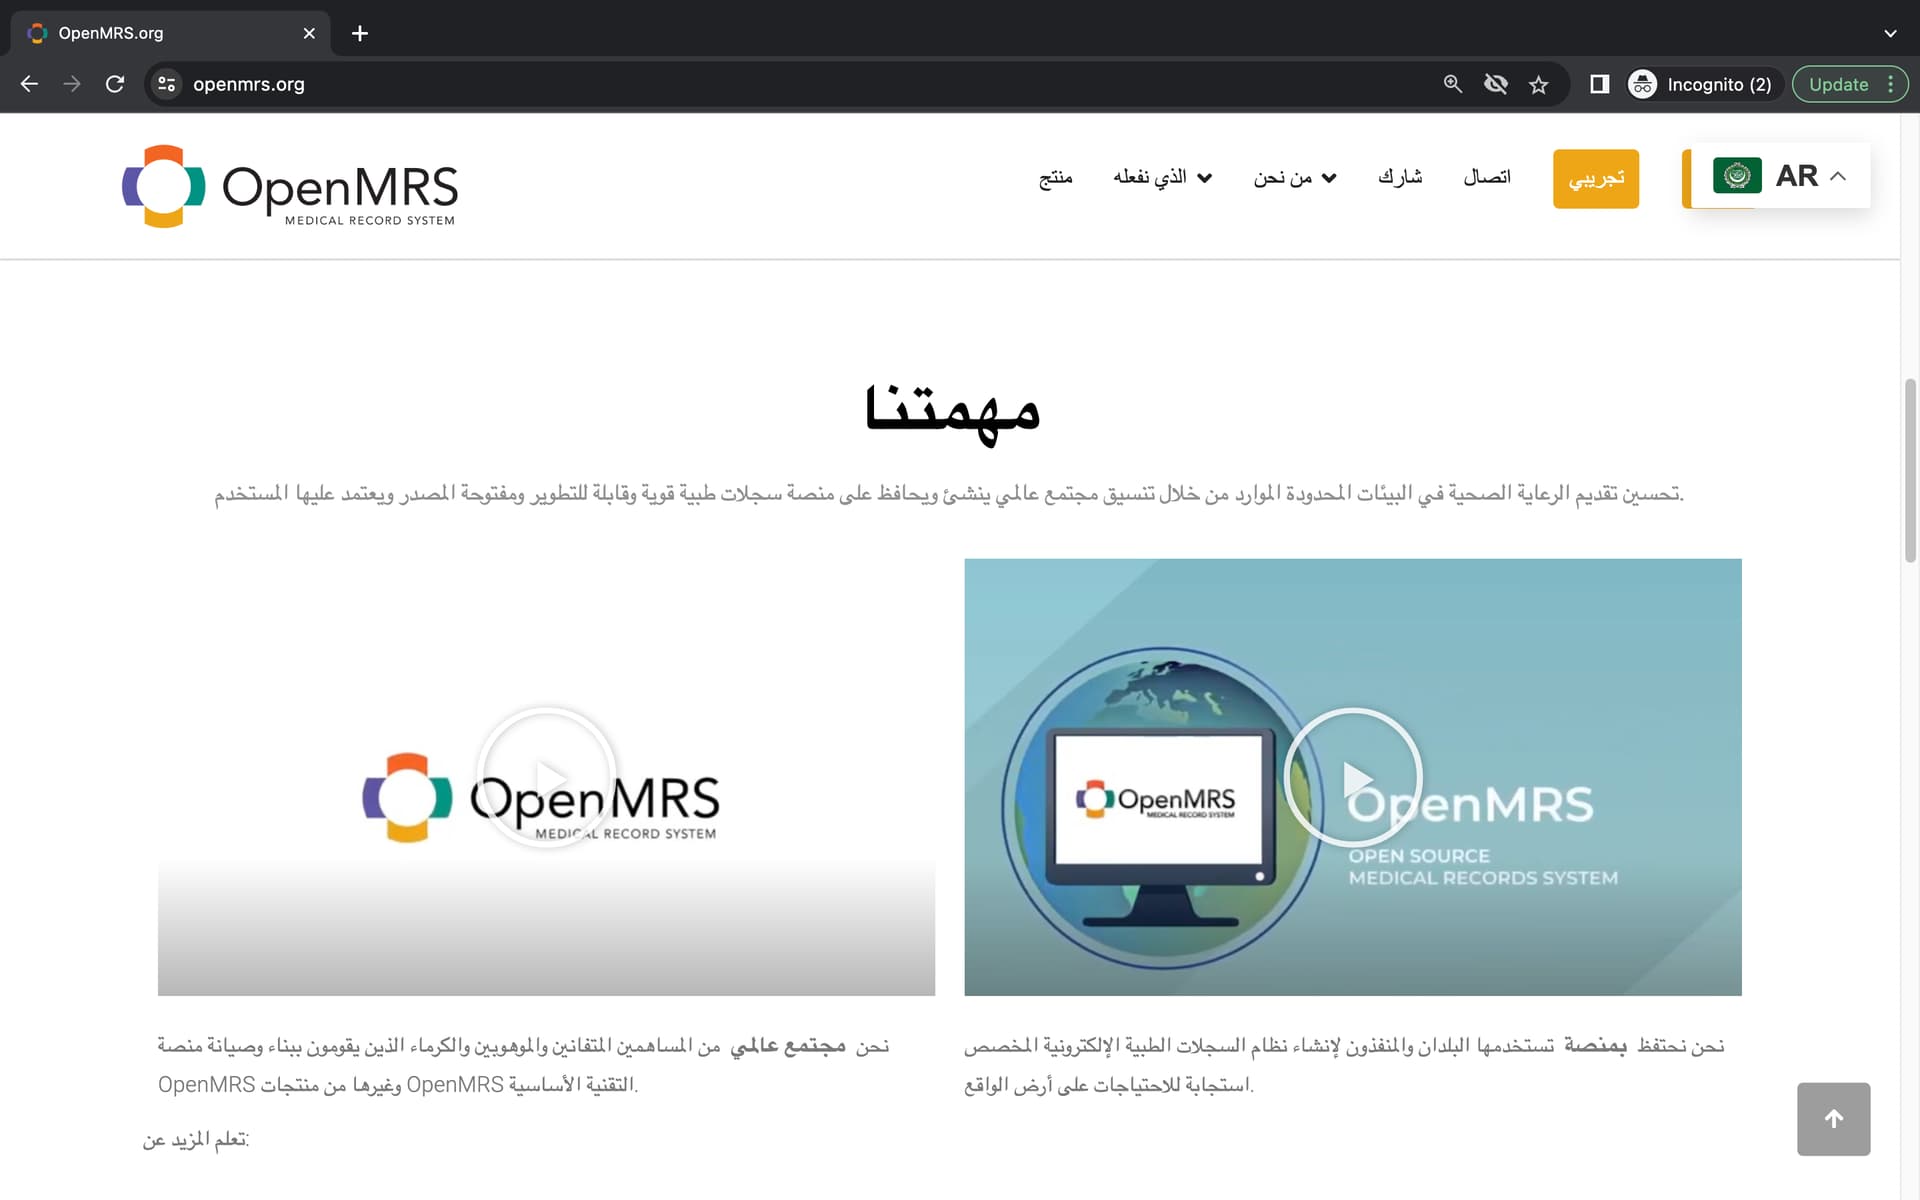 OpenMRS.org is now Auto-Translated in >18 languages! French, Spanish,  Portuguese, Arabic, and many more - Community - OpenMRS Talk